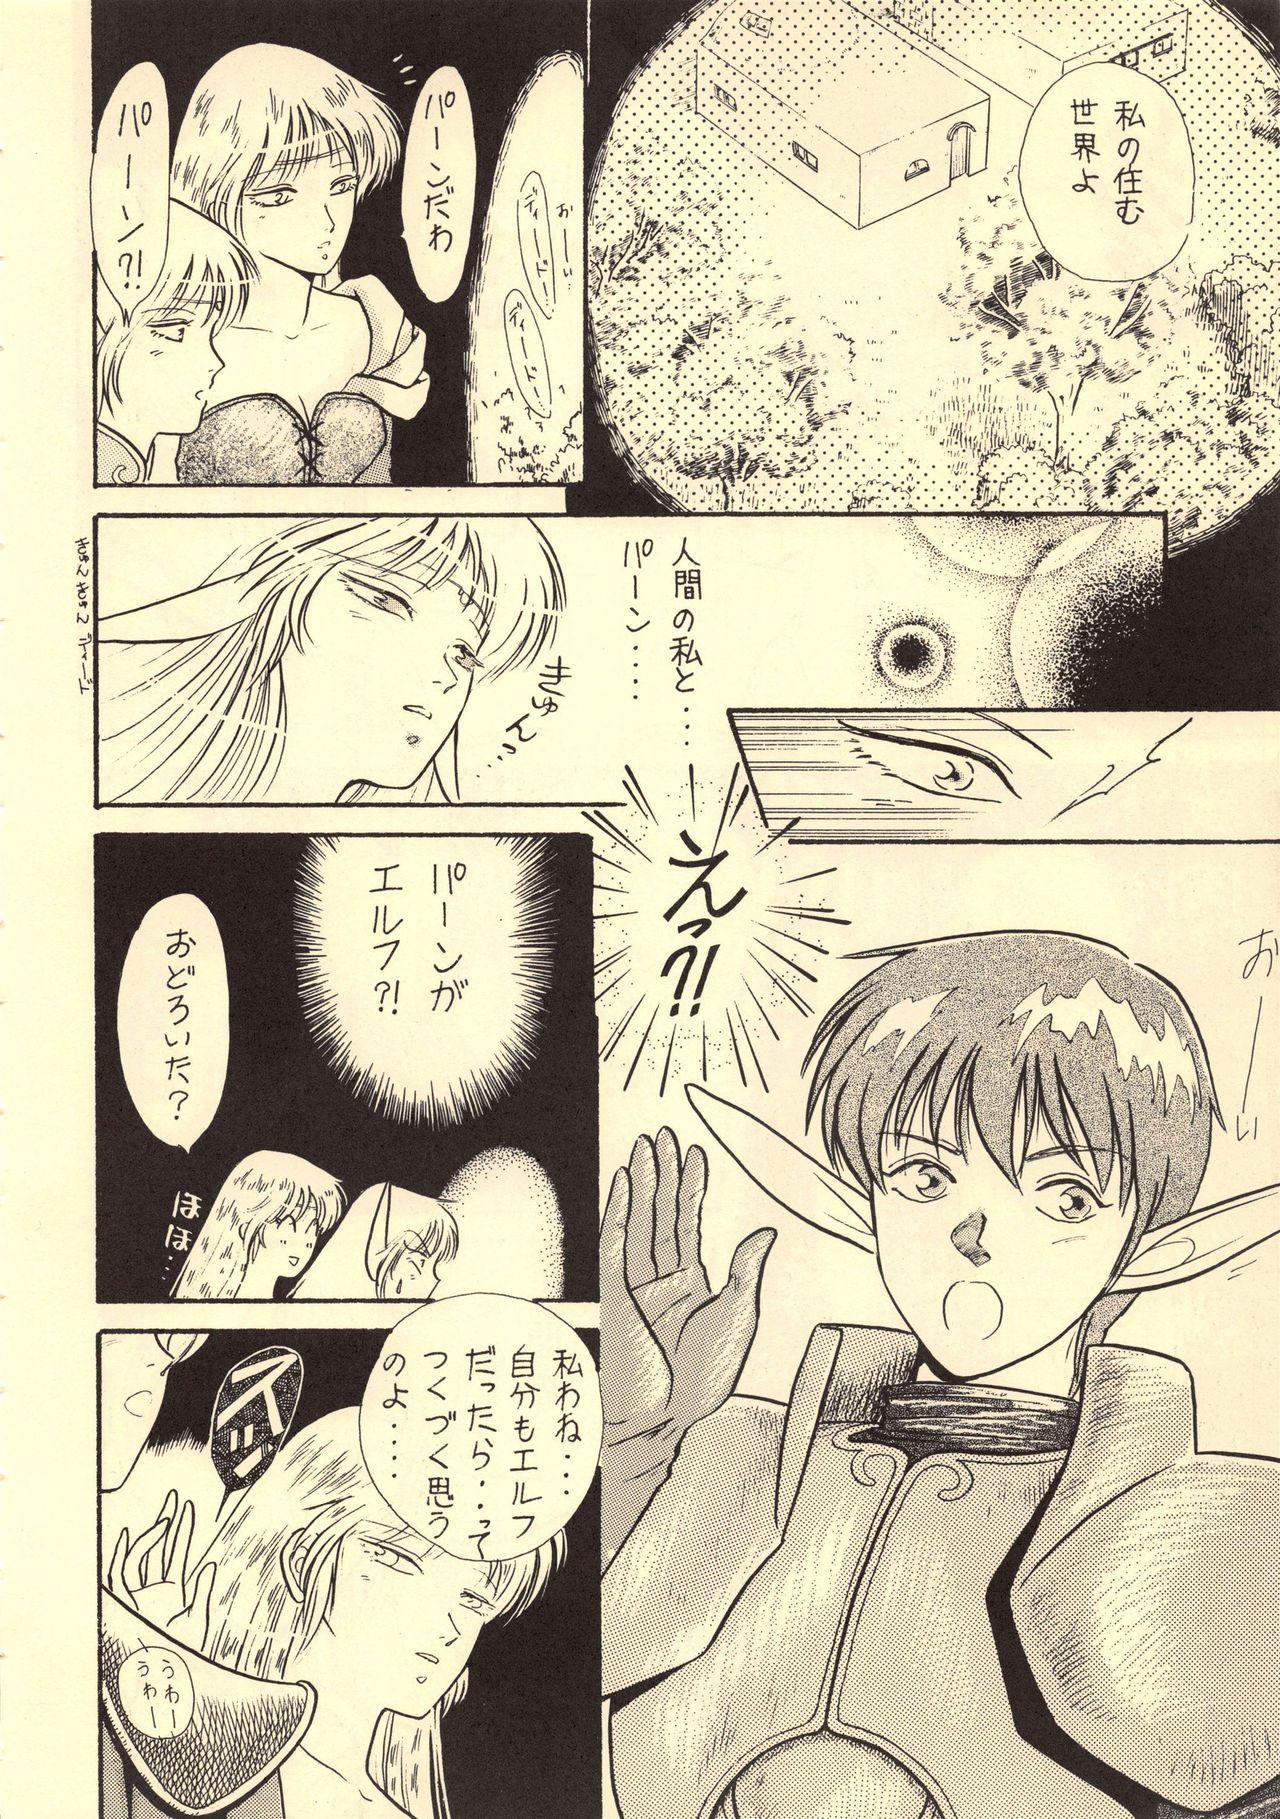 Tan Elf no Musume Kaiteiban - Die Elfische Tochter revised edition - Record of lodoss war Massages - Page 10